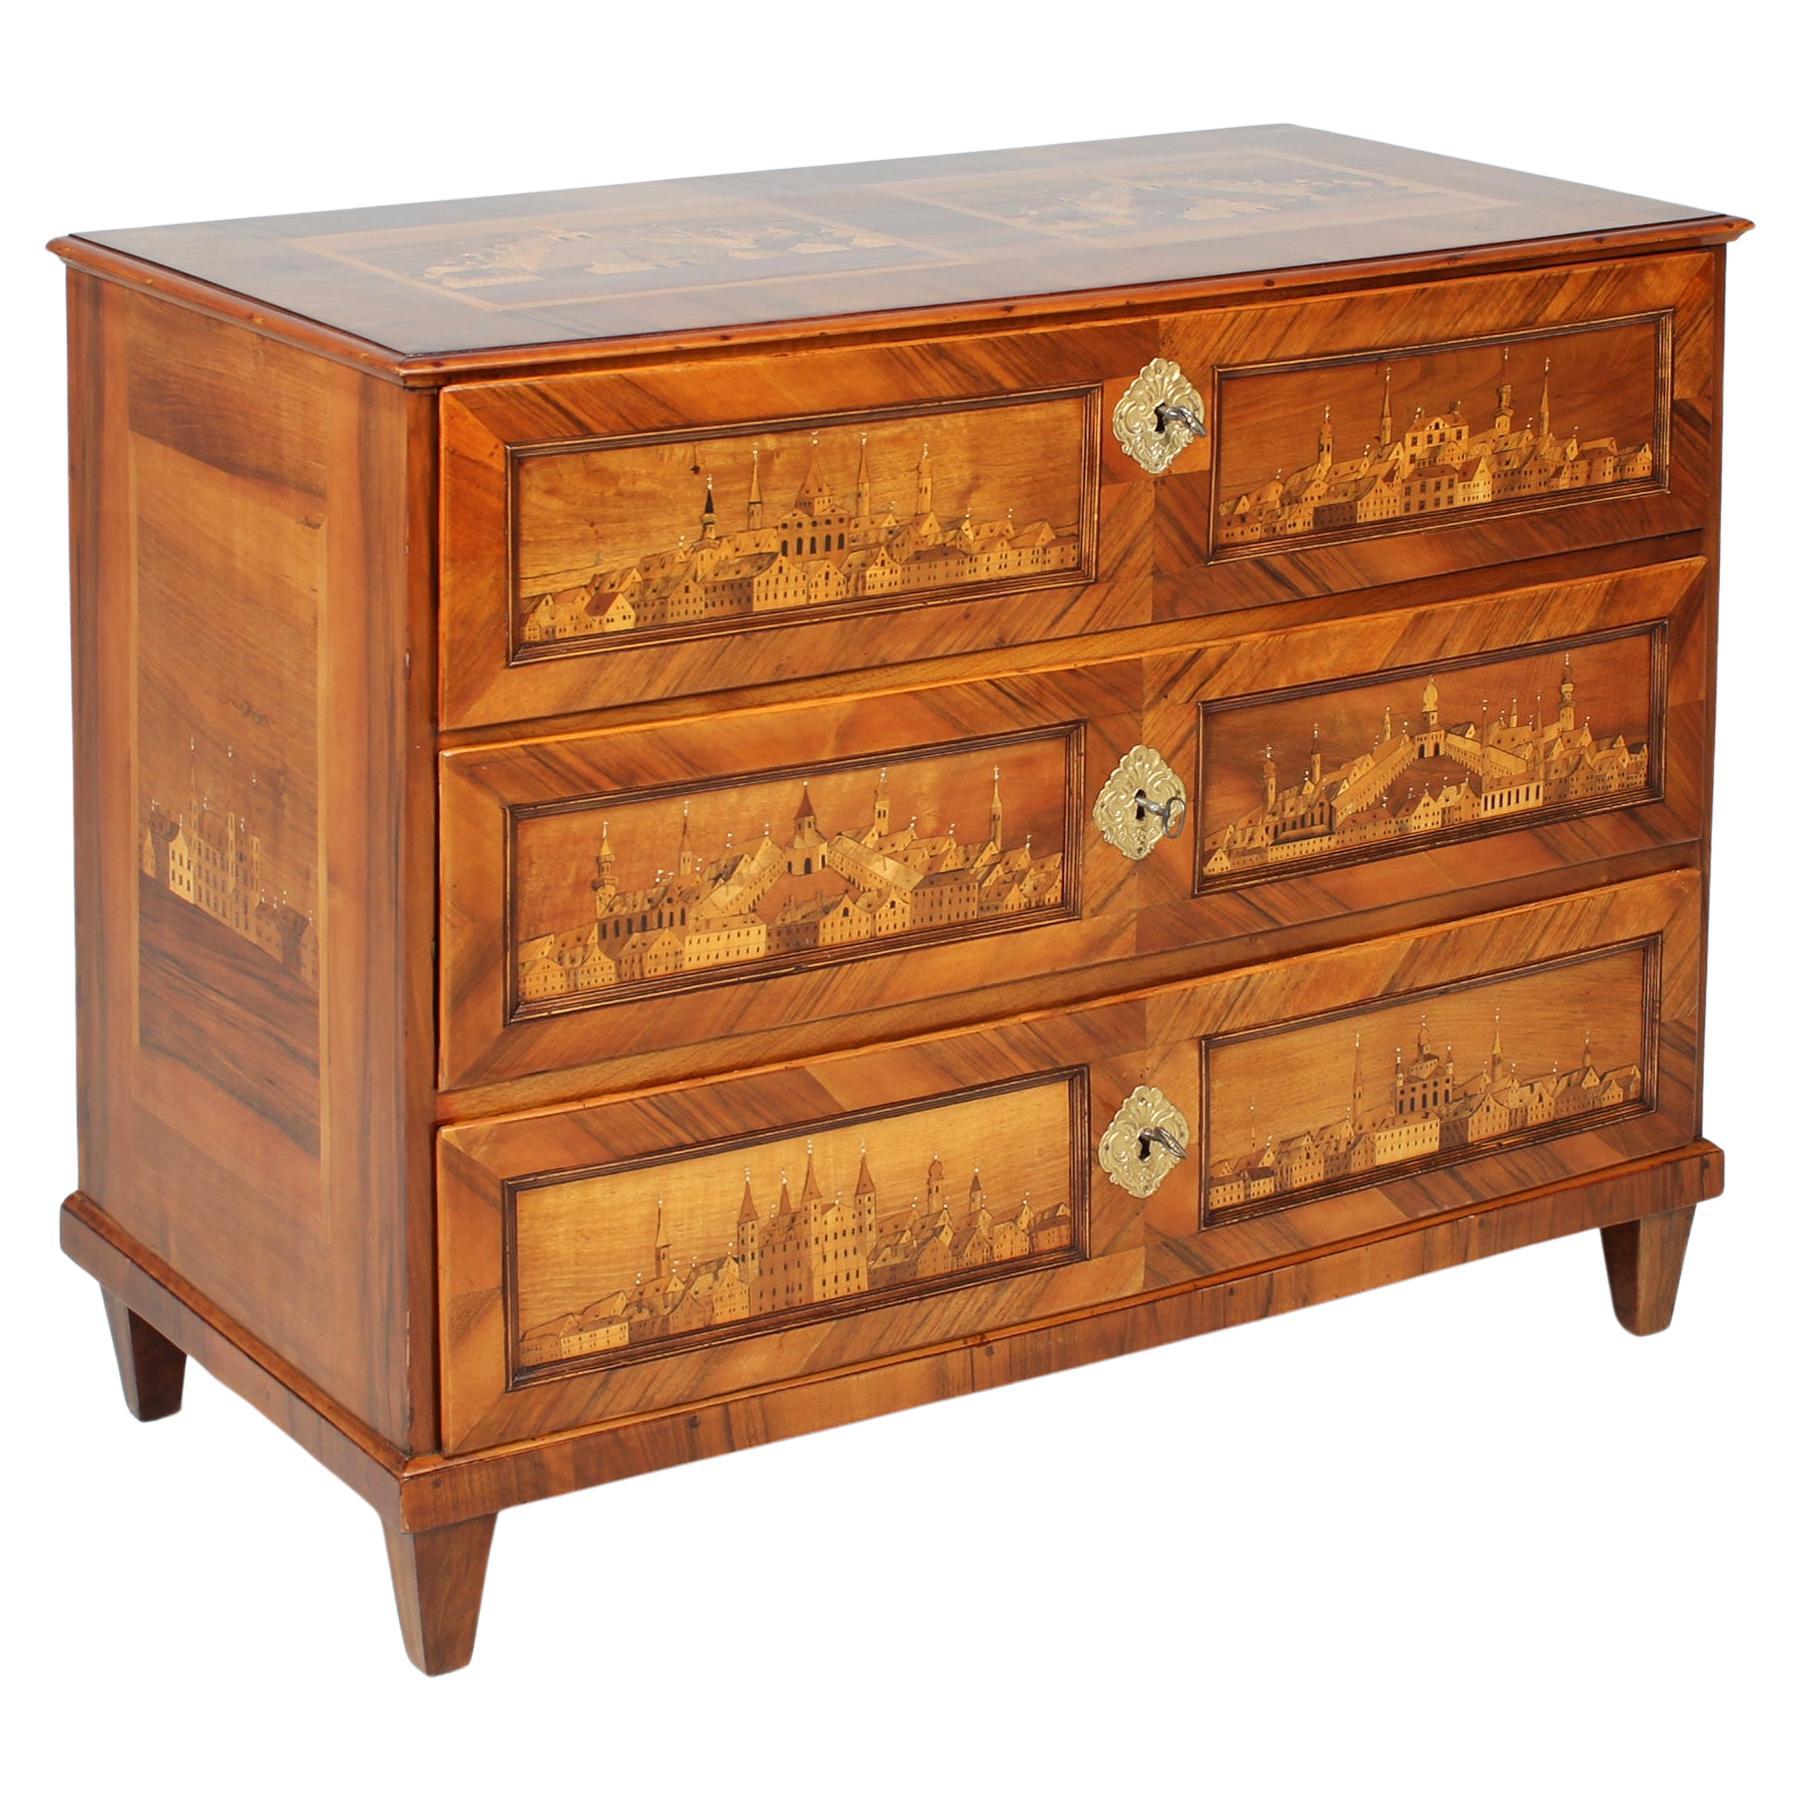 Early 19th Century Italian Louis XVI Chest of Drawers with Fantastic Marquetry For Sale